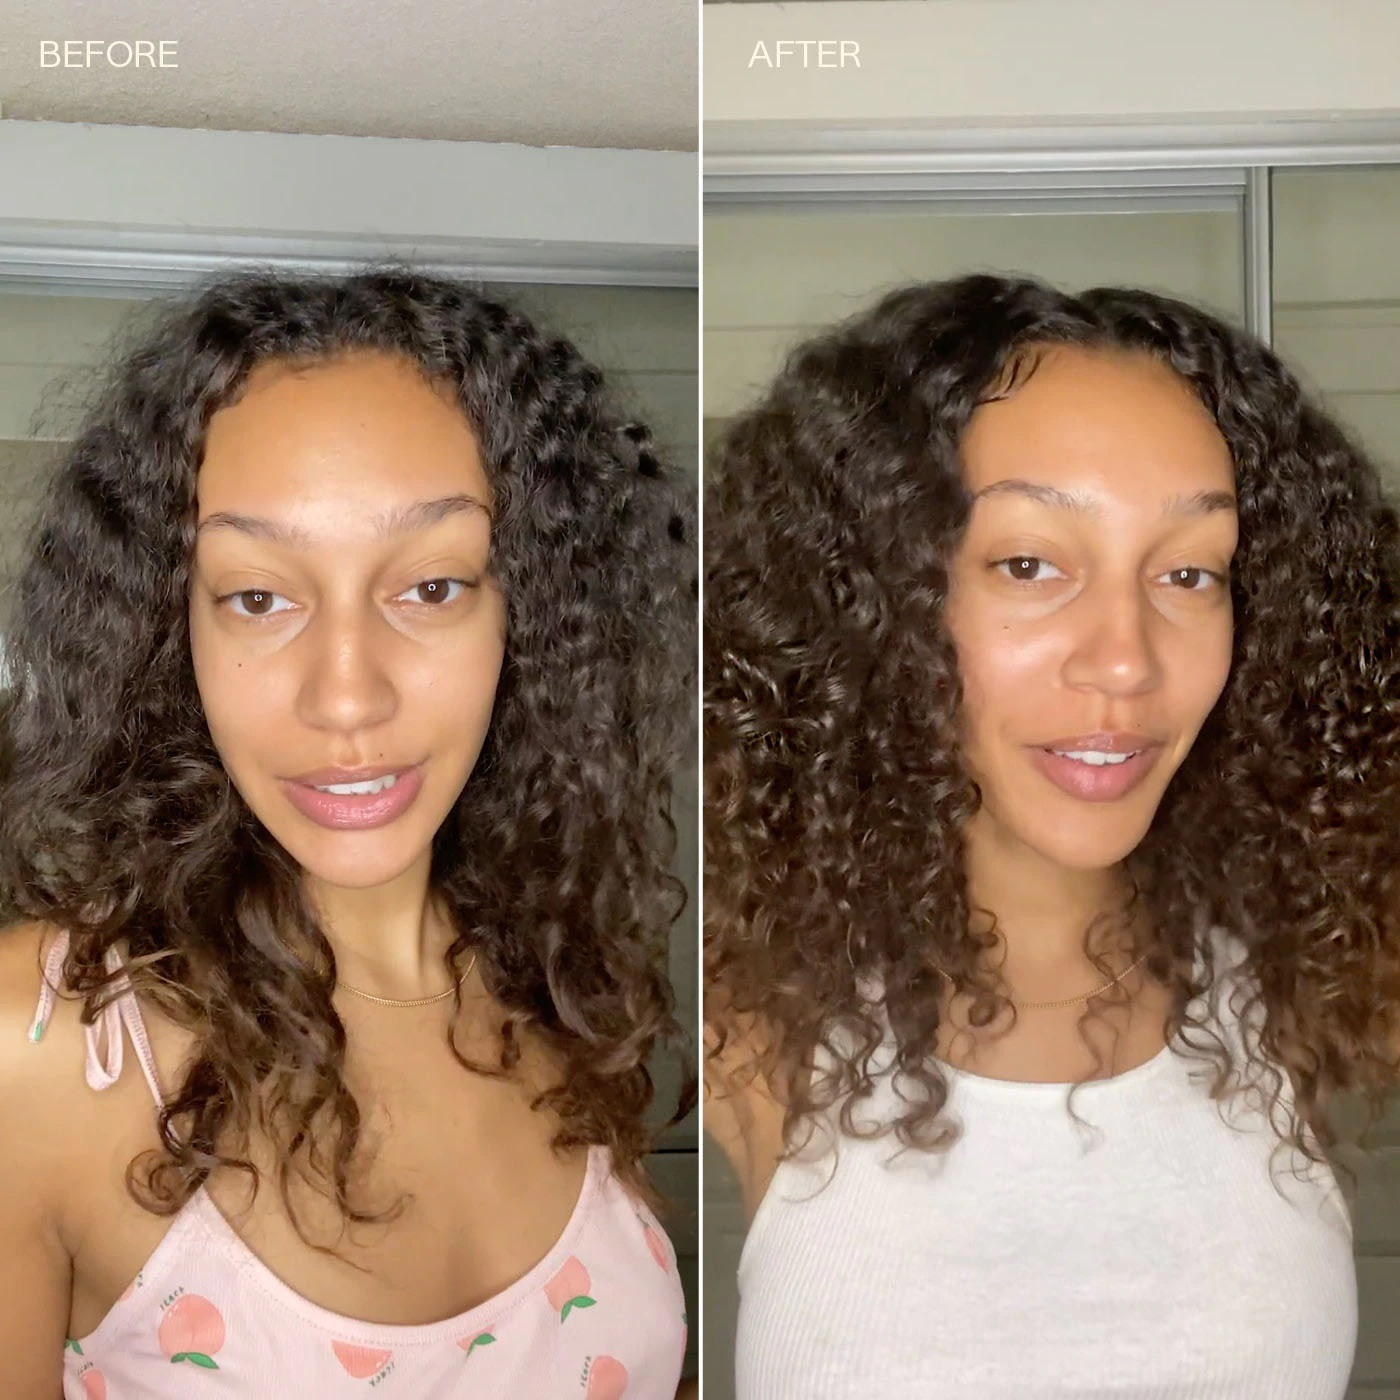 How to Air Dry vs Diffuse  Tips For Using a Hair Diffuser for Curly Hair   Rizos Curls